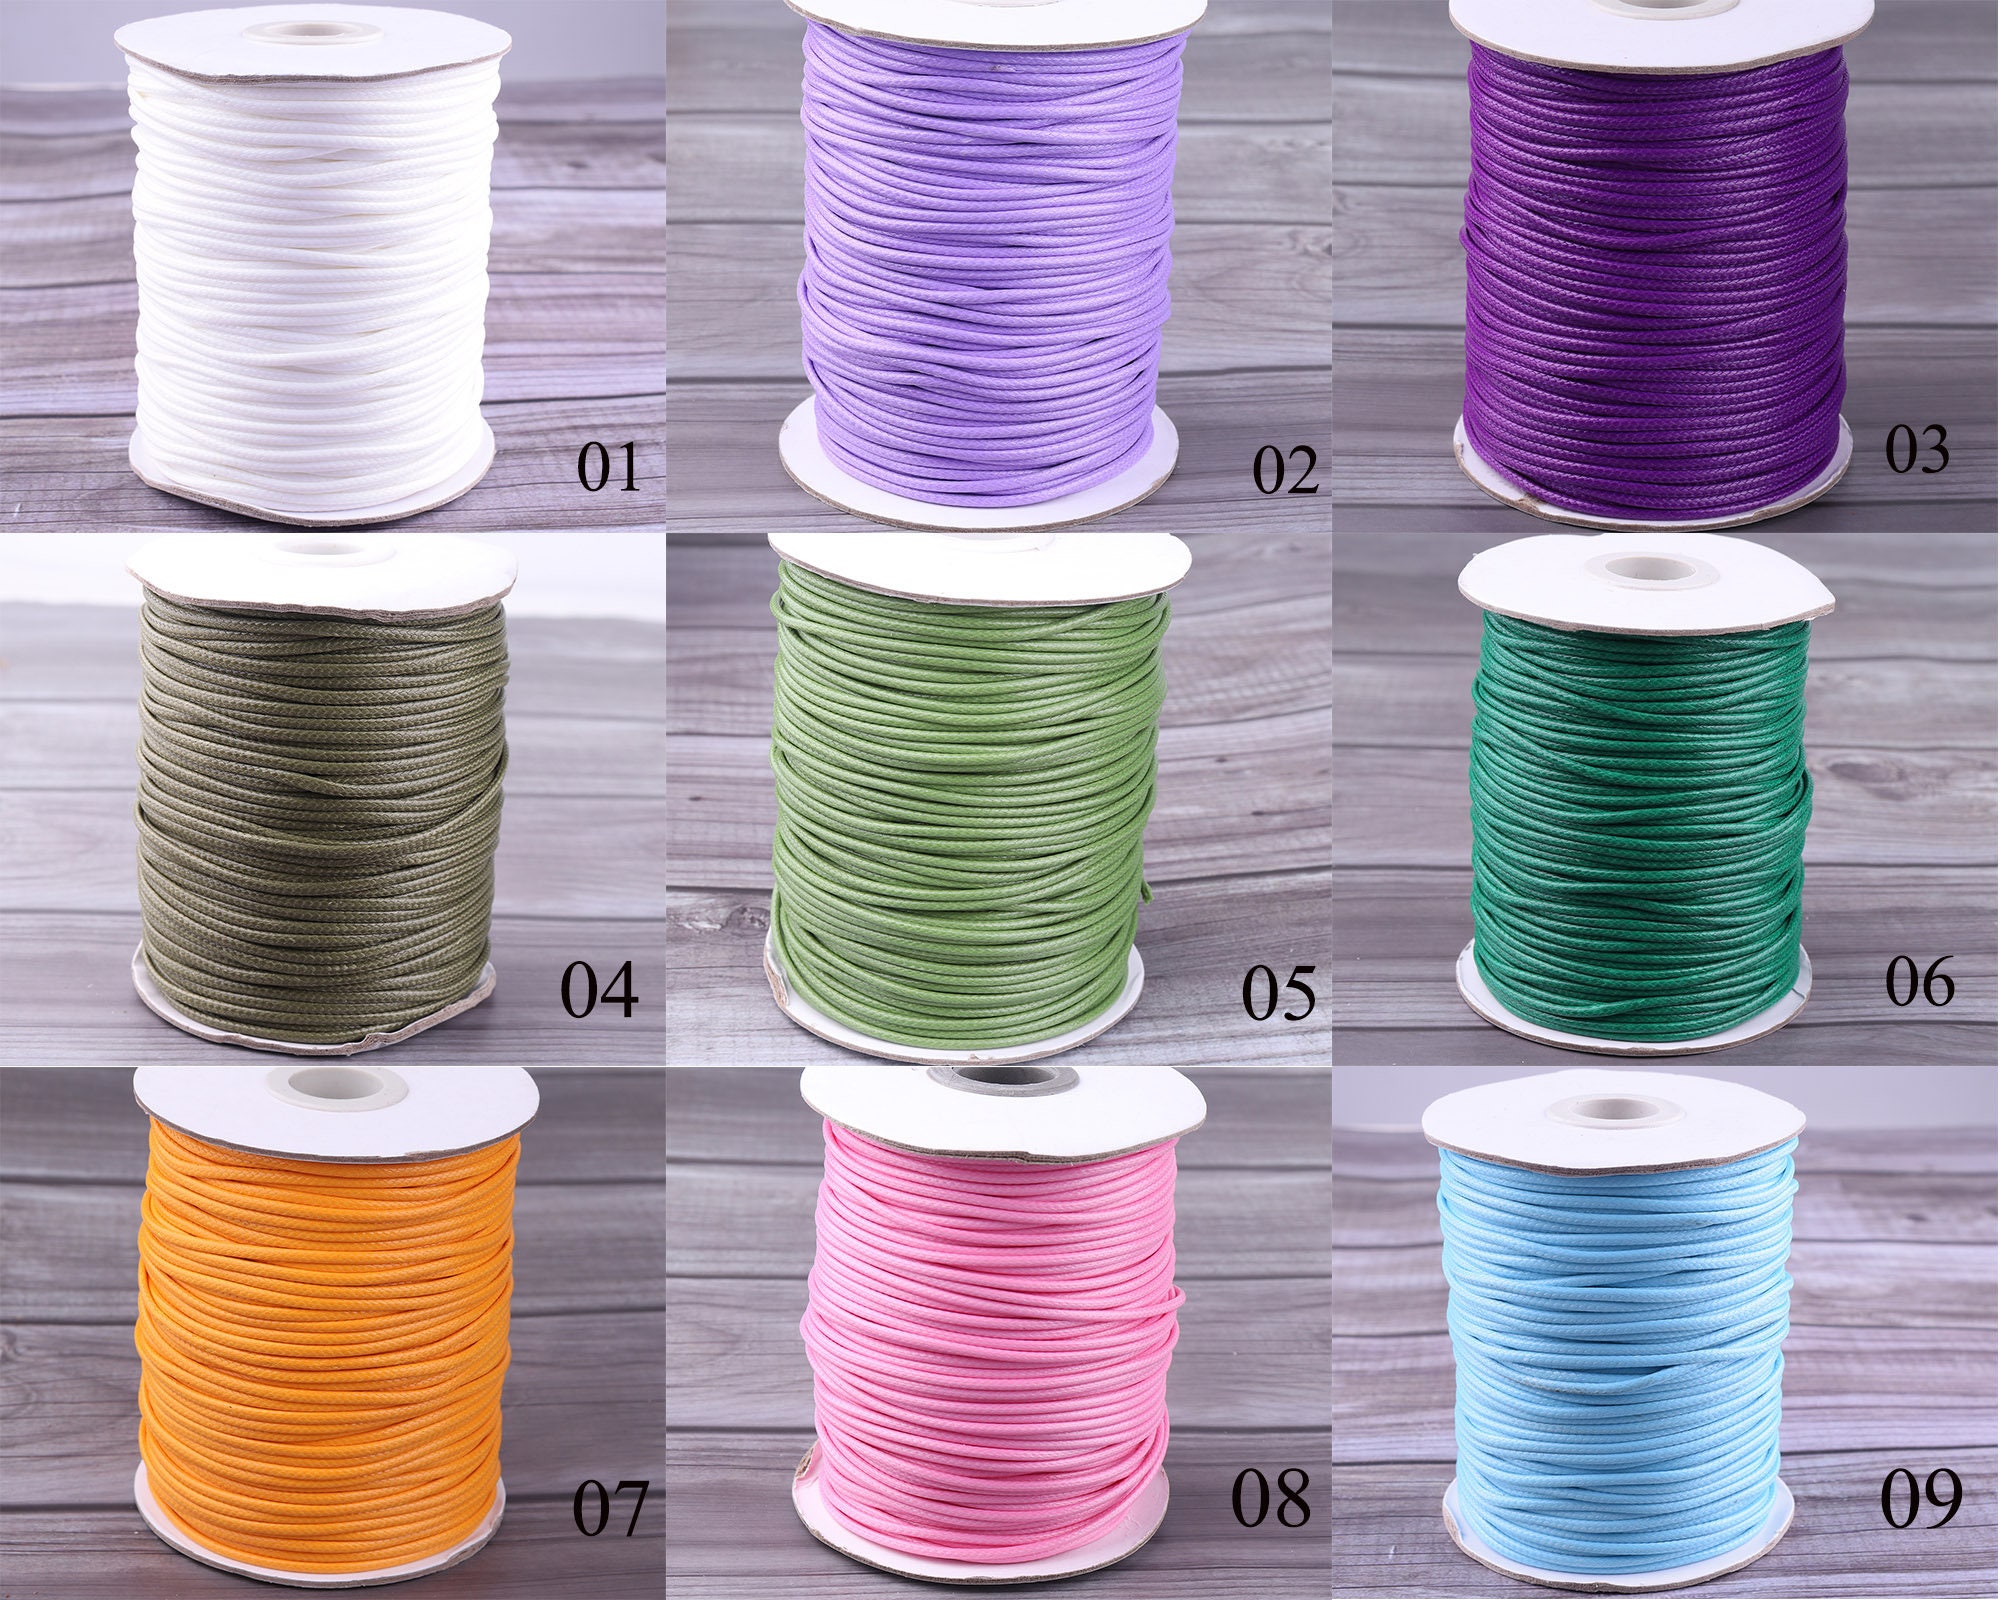 10meters Waxed Polyester Thread, Waxed Cord DIY Craft Macrame Knotting for Jewelry  Making, Bracelet Cord, Necklace Cord 1.0mm 